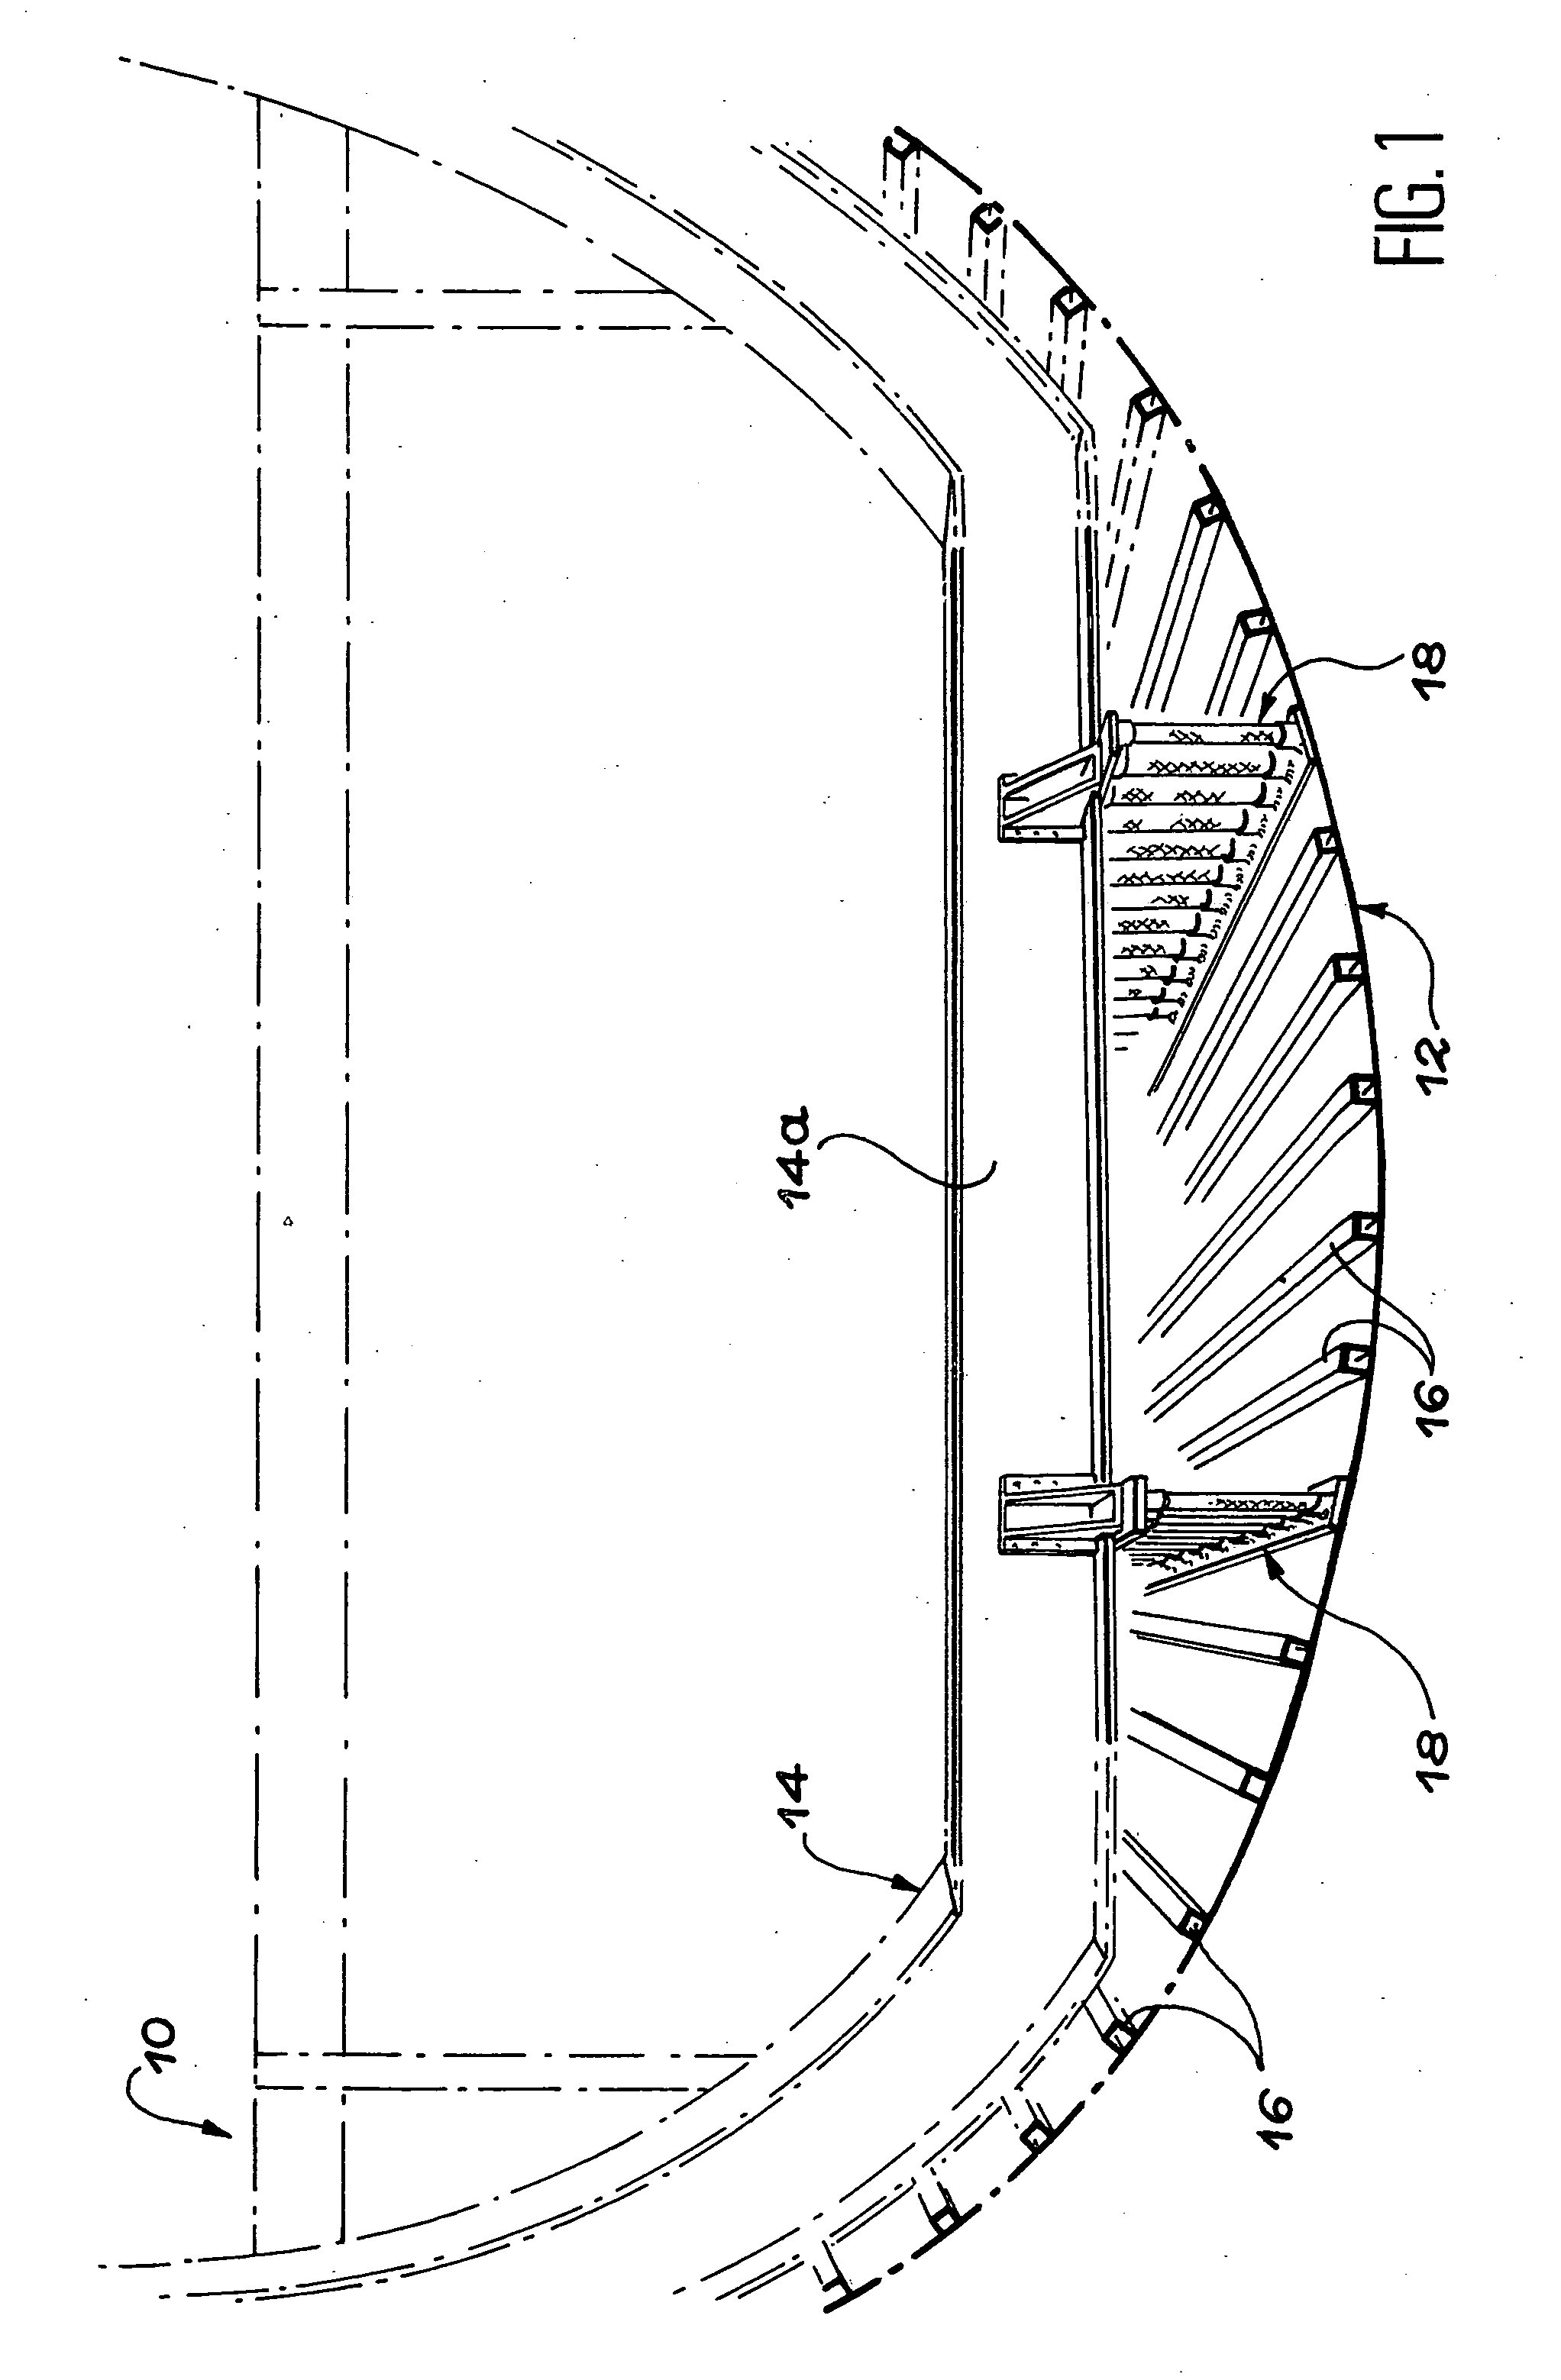 Composite beam with integrated rupture initiator and aircraft fuselage such beams